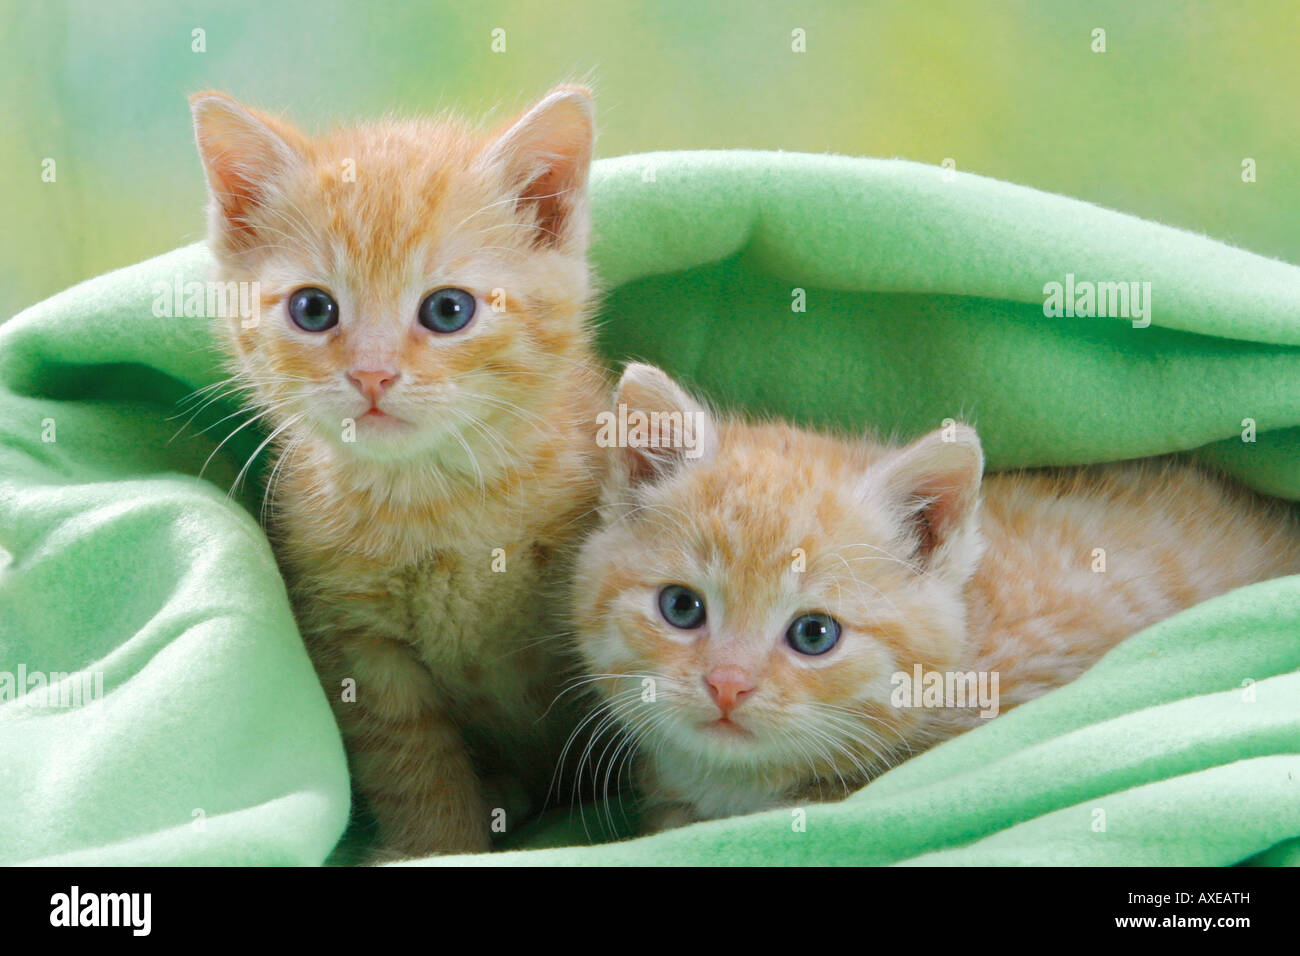 Domestic cat. Two kittens under a green blanket Stock Photo